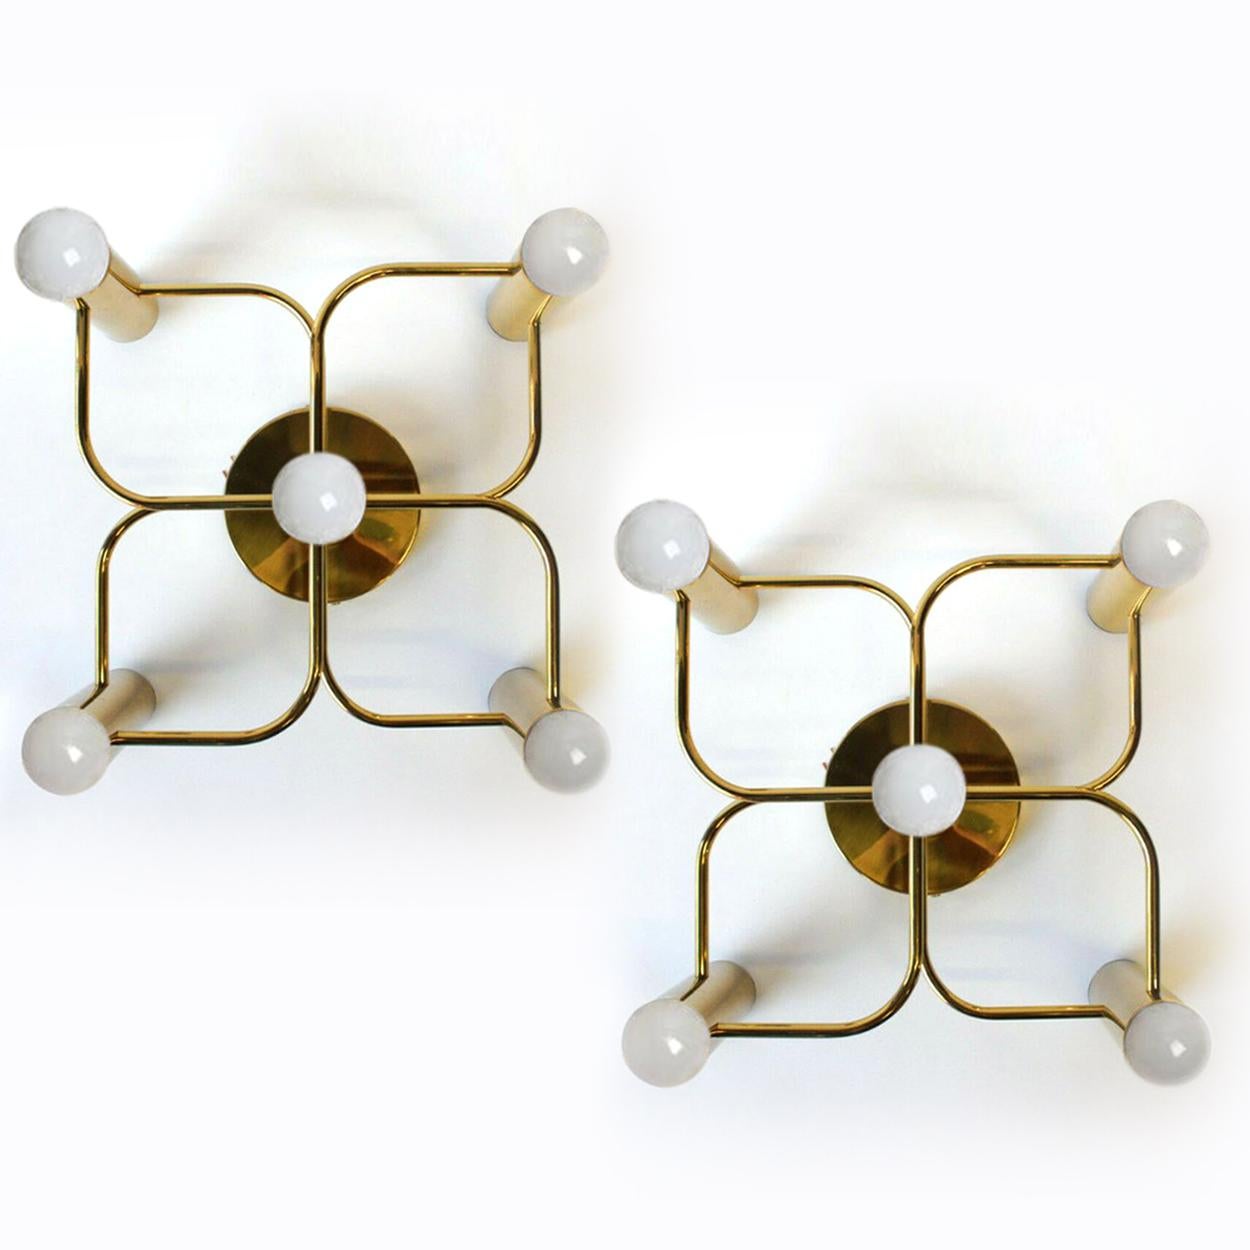 1 of the 4 Leola Sculptural Brass 5-Light Ceiling or Wall Flushmount, 1970s 3